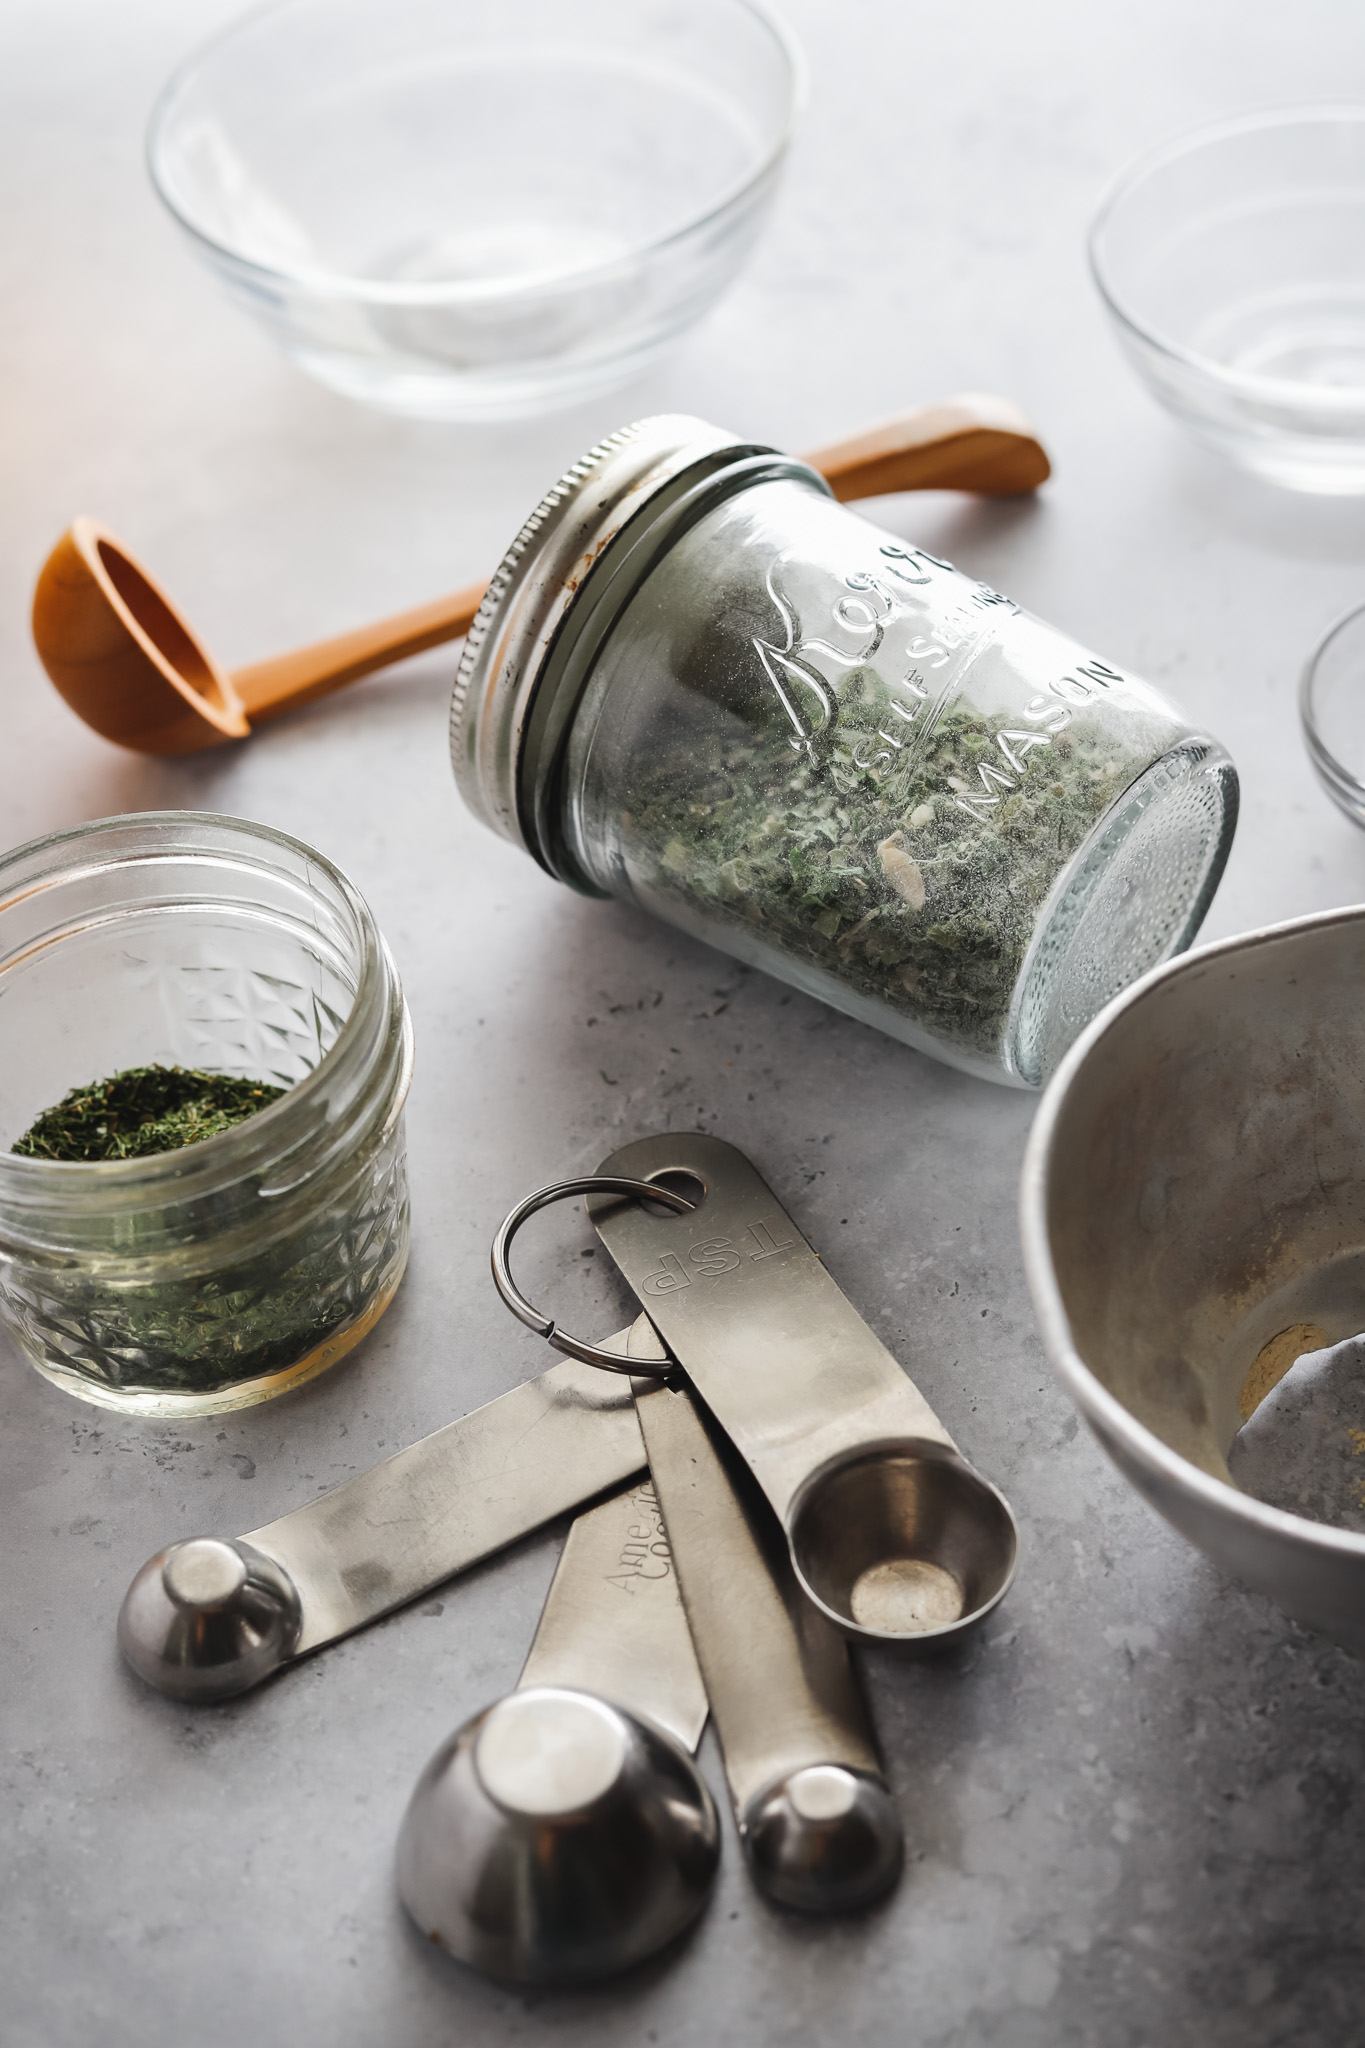 Grab your herbs, a jar, and 5 minutes and you'll have homemade ranch seasoning!